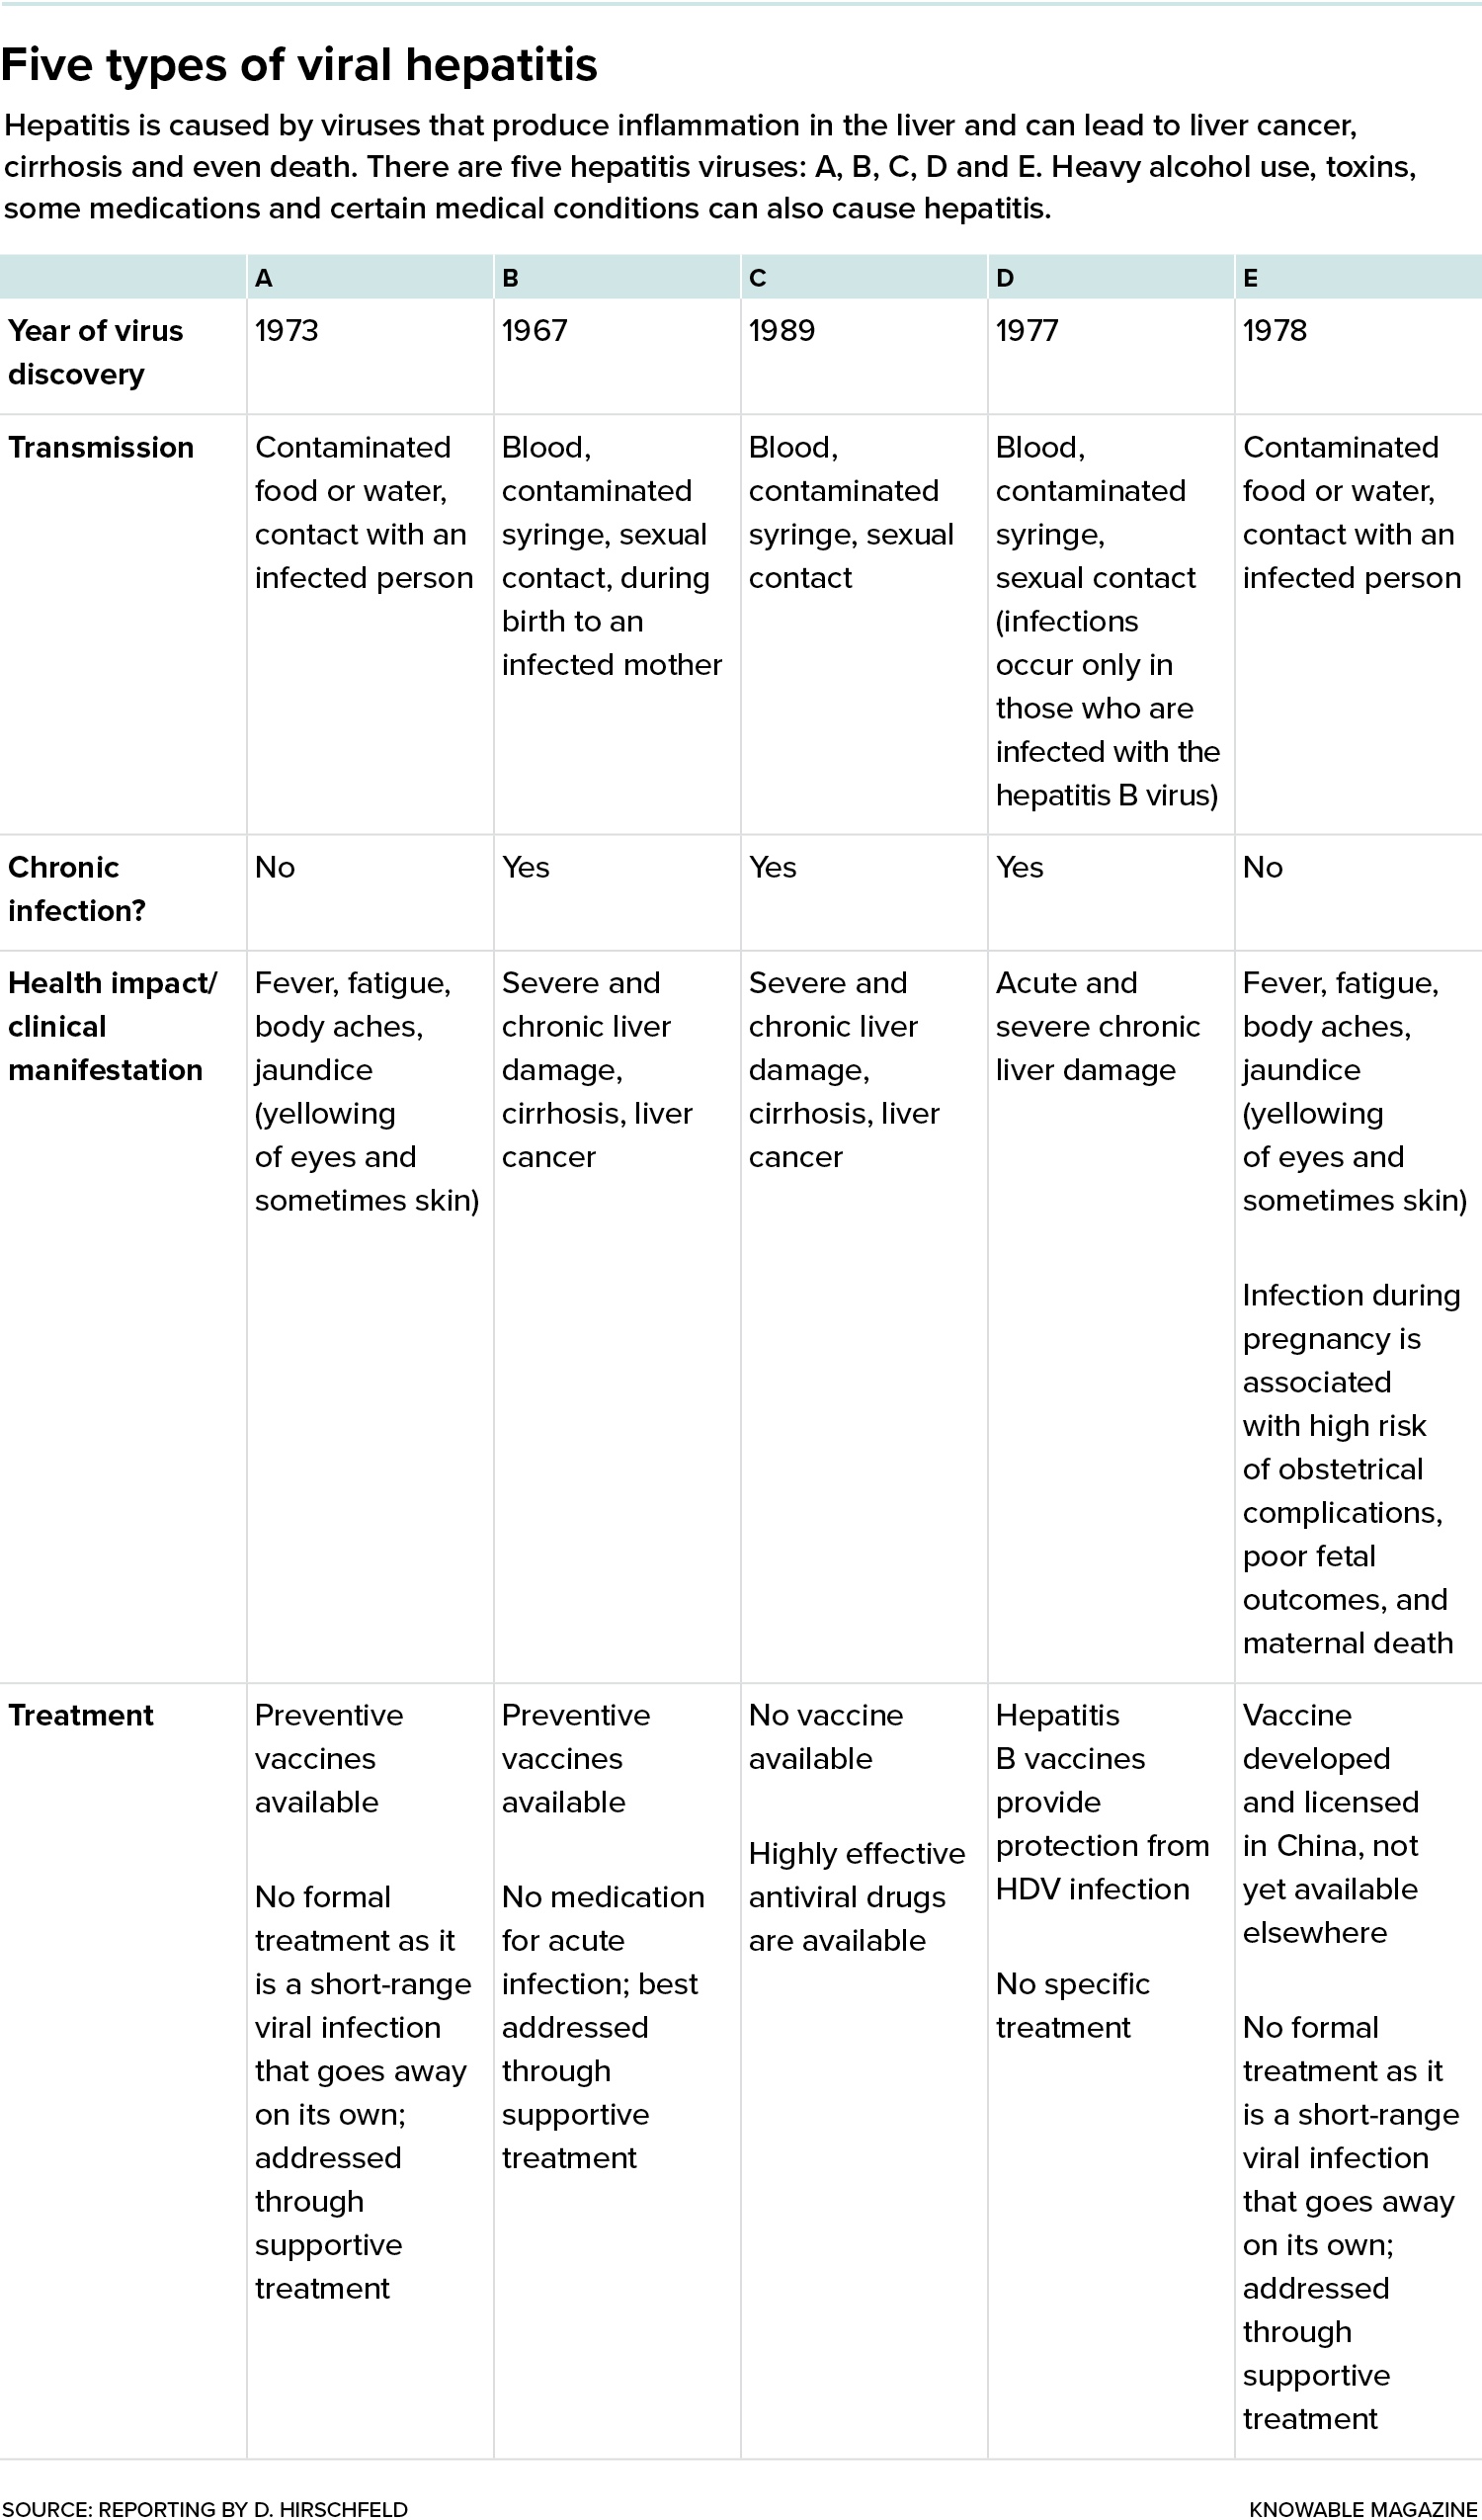 A table lists the five hepatitis viruses and their features, including the status of treatments and vaccines